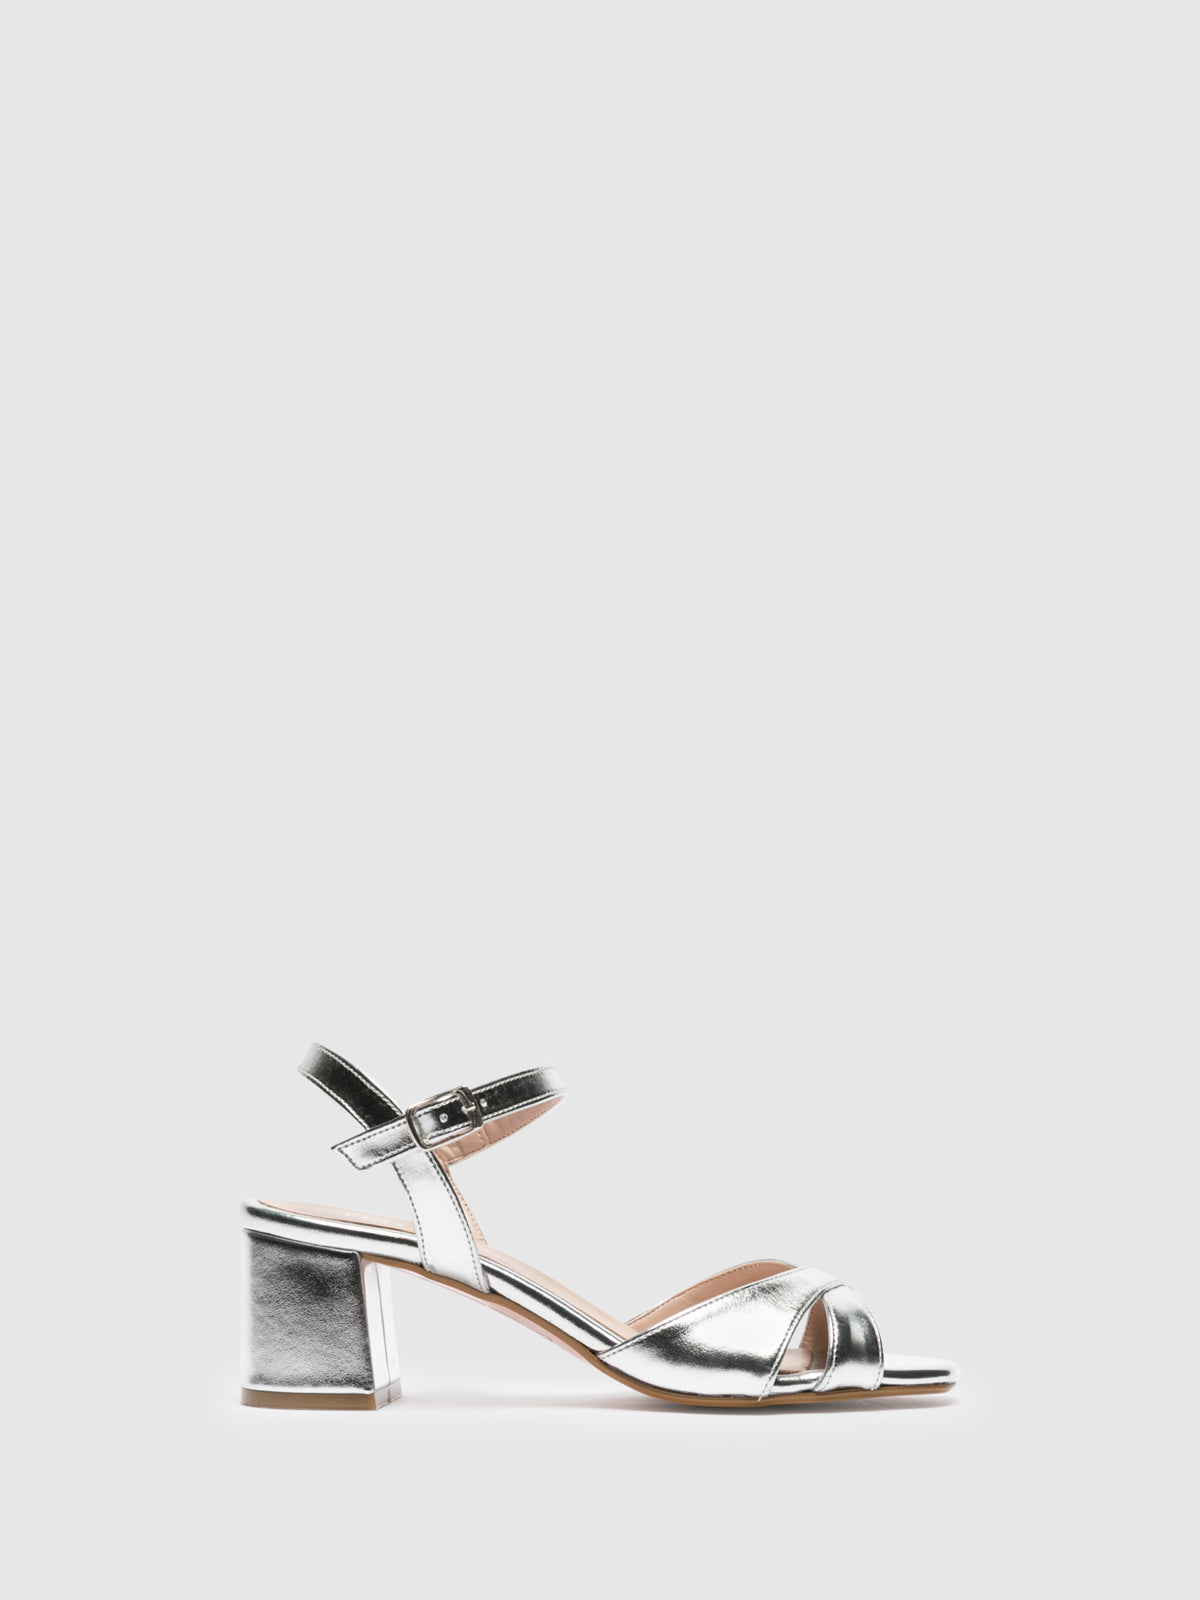 Foreva Silver Ankle Strap Sandals